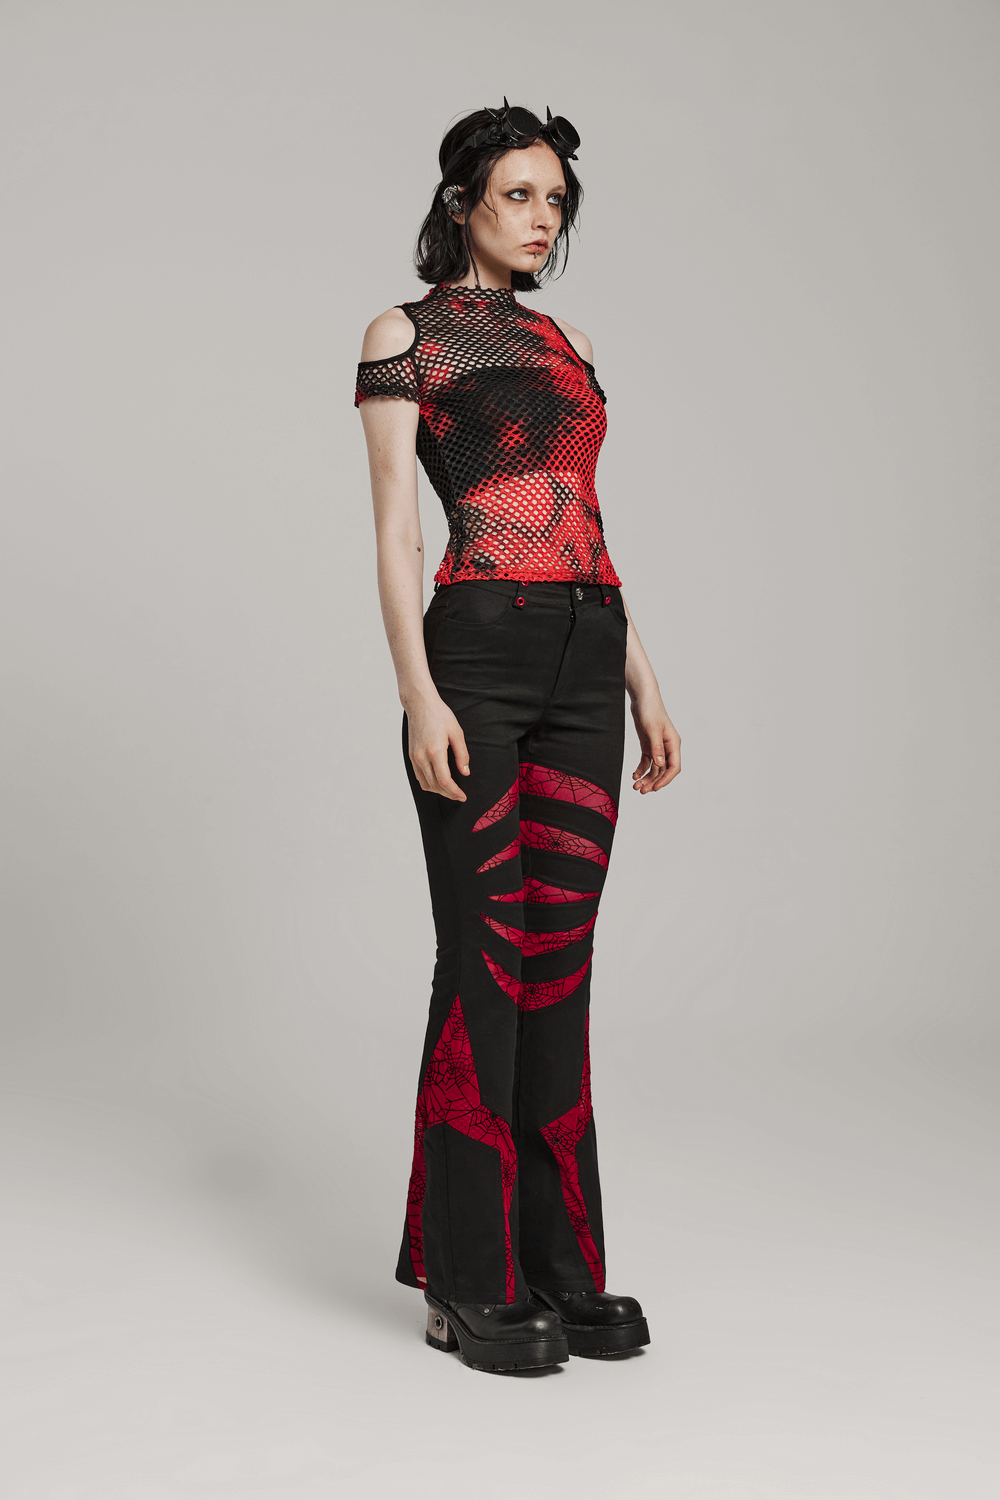 Stretch Gothic Flared Pants with Spiderweb Red Mesh